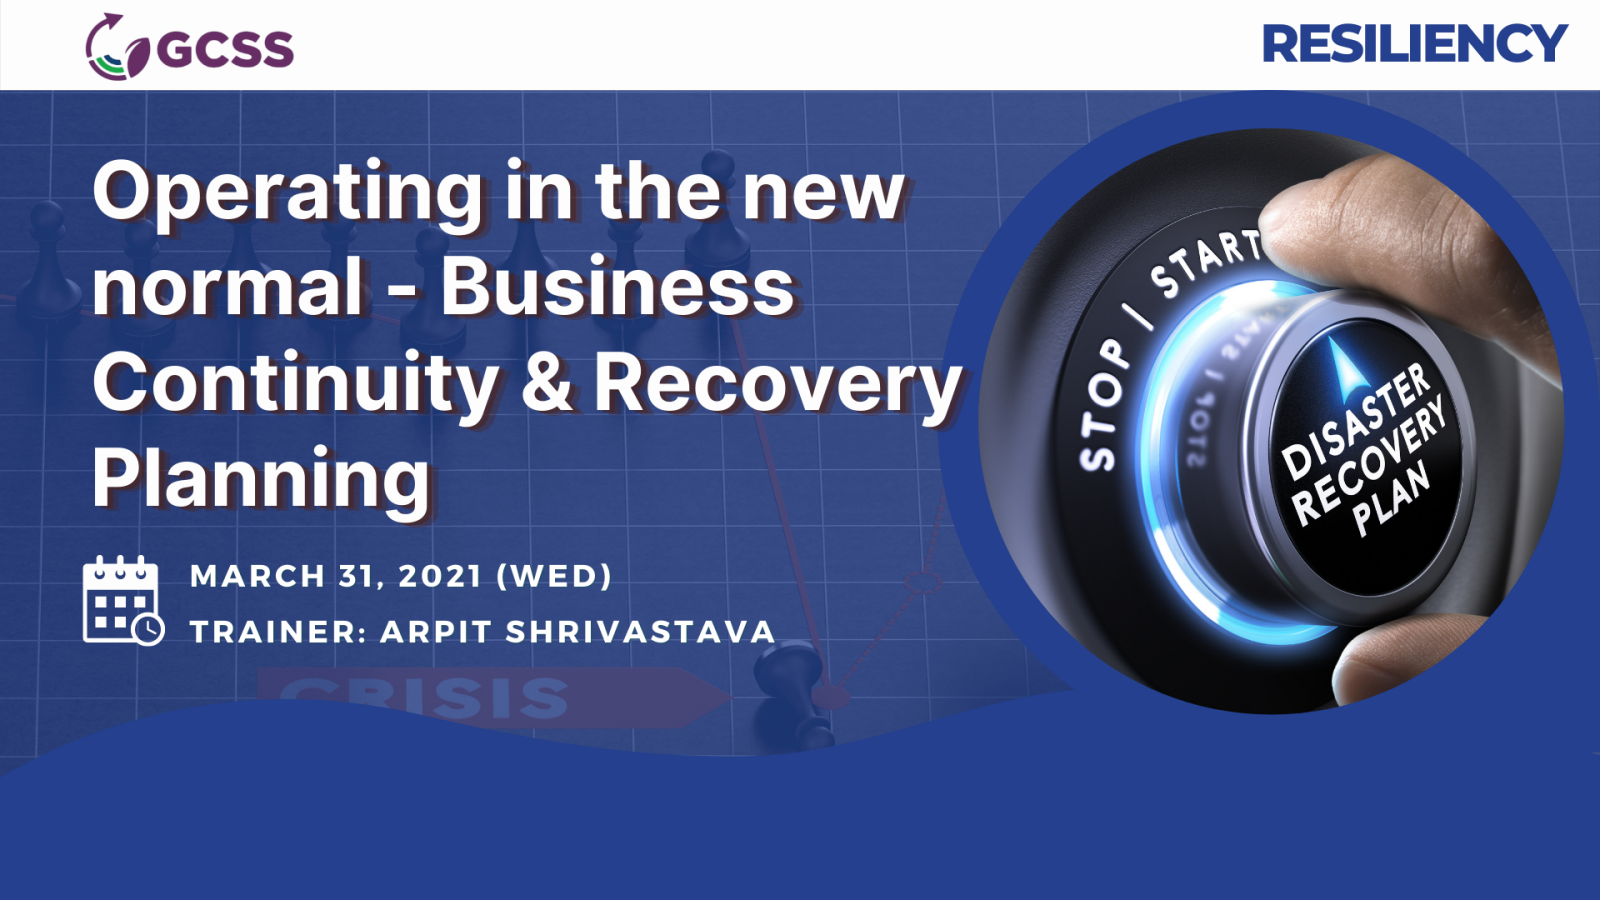 Operating in the new normal - Business Continuity & Recovery Planning, Manila, National Capital Region, Philippines